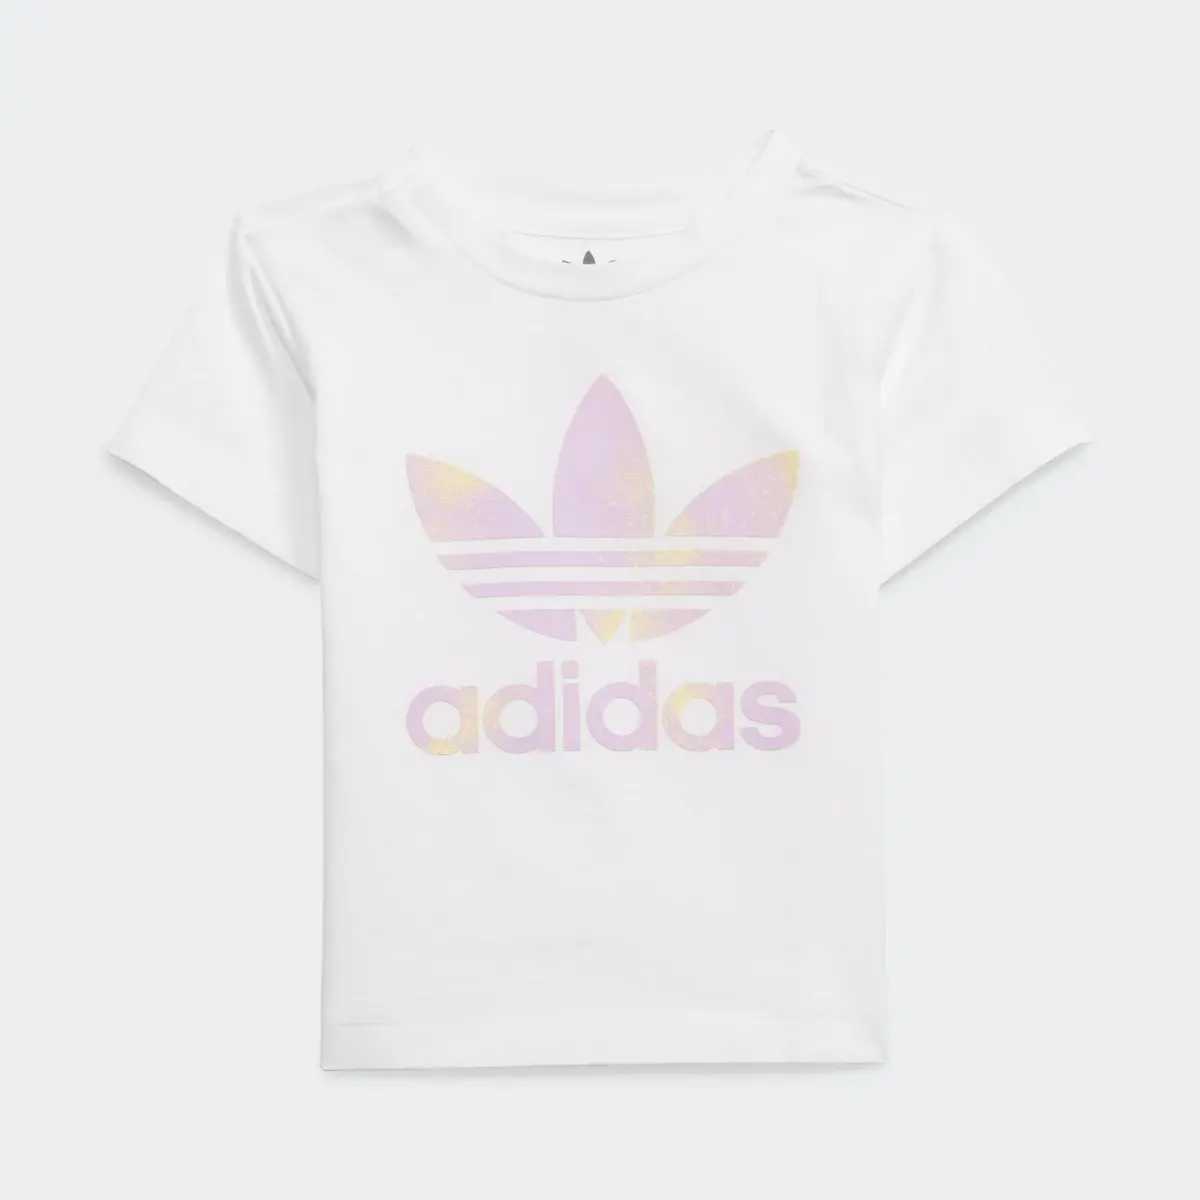 Adidas Completo Graphic Logo Shorts and Tee. 3